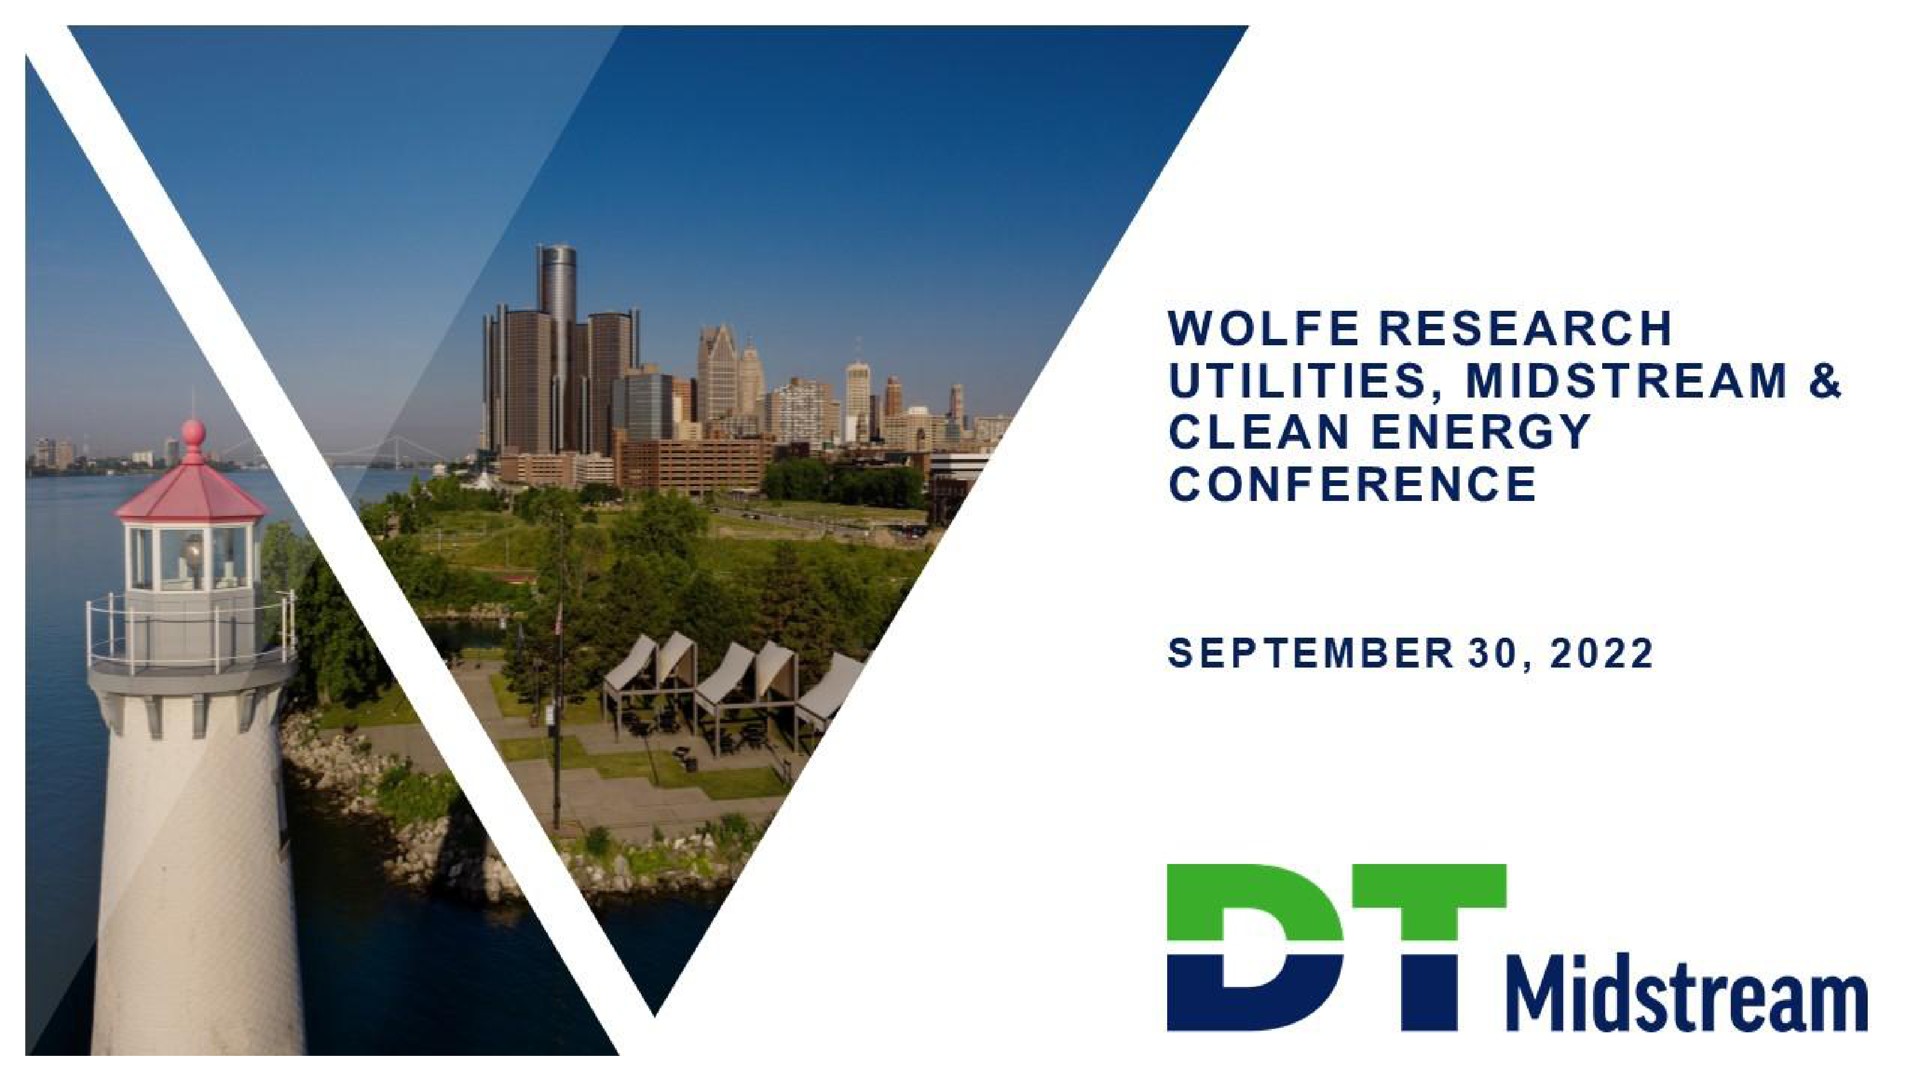 research utilities midstream clean energy conference midstream | DT Midstream